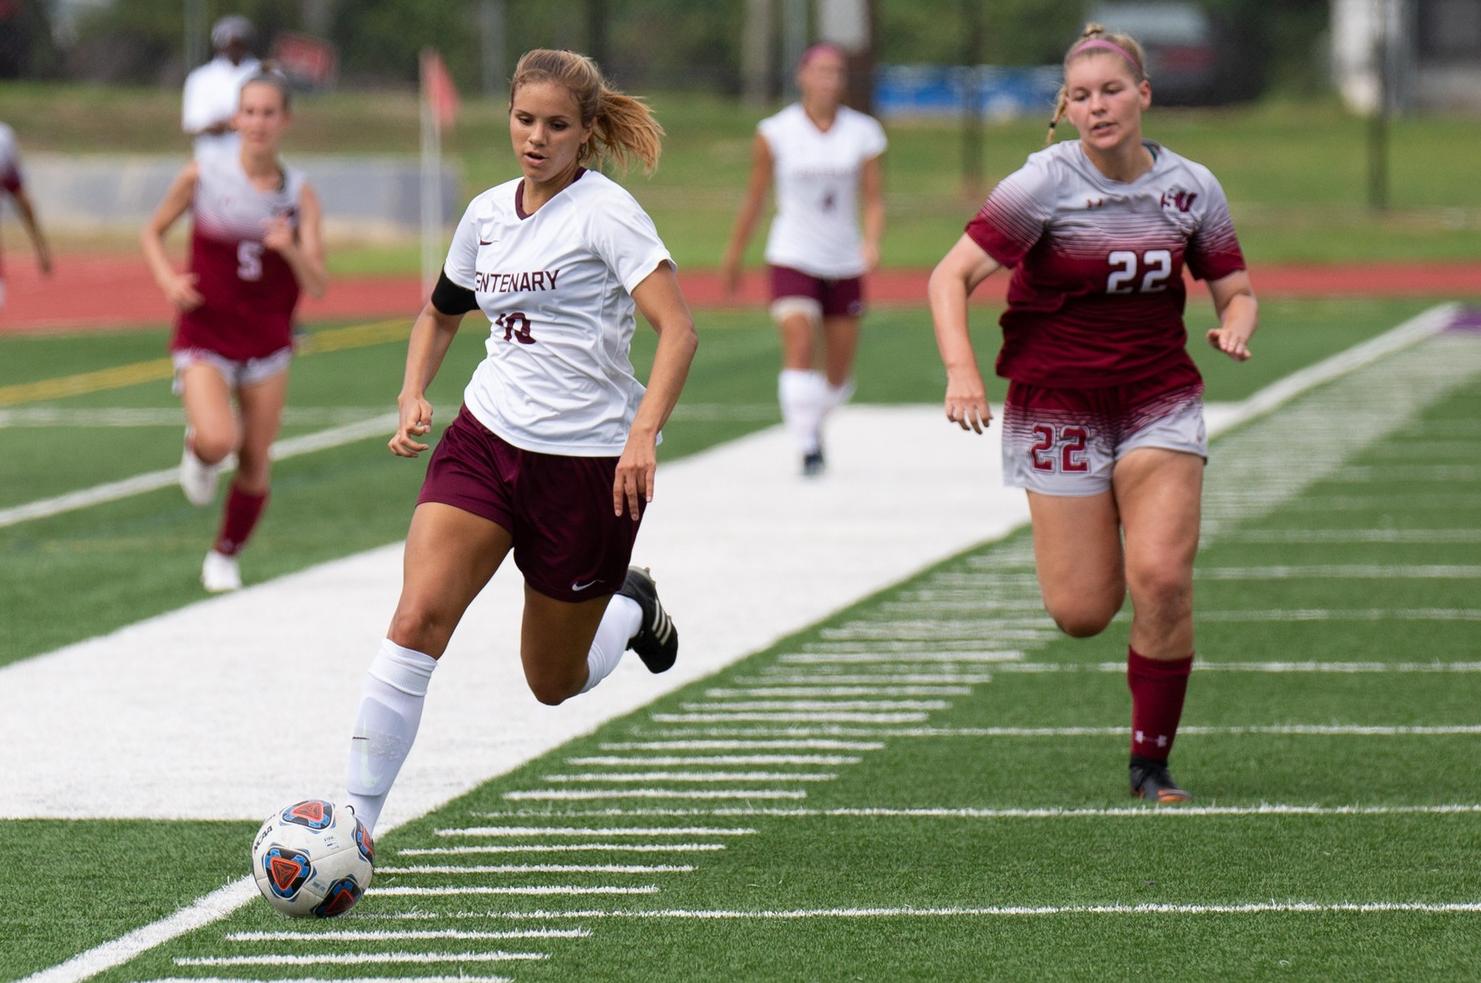 Junior Kyra Montes named the NCAA Division III Women's Player of the Week by the United Soccer Coaches (Photo courtesy of Curt Youngblood).